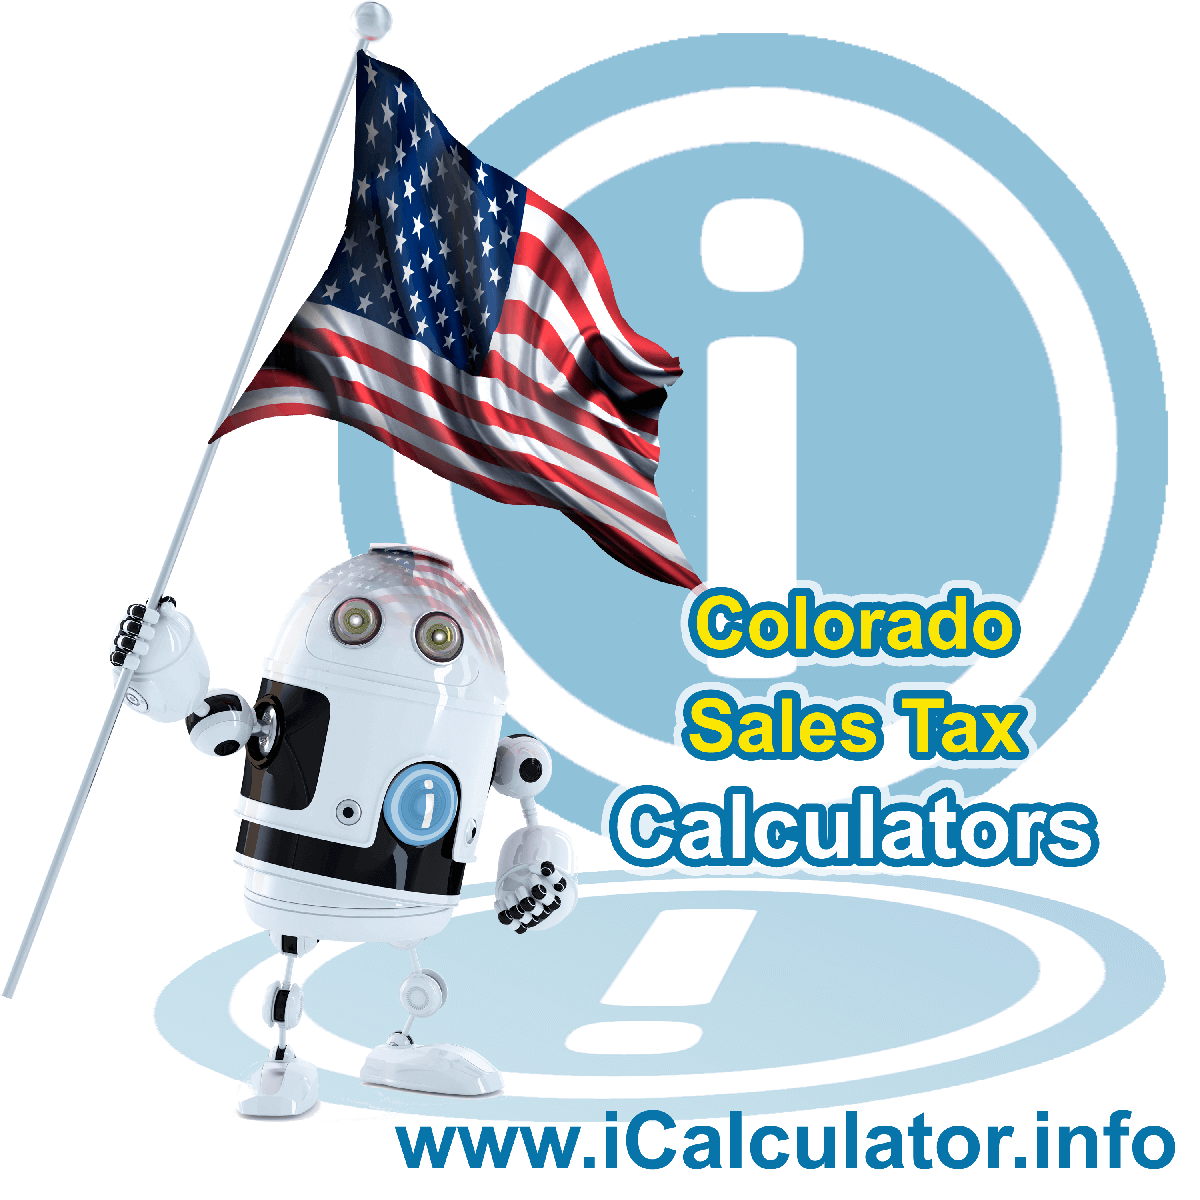 Northglenn Sales Rates: This image illustrates a calculator robot calculating Northglenn sales tax manually using the Northglenn Sales Tax Formula. You can use this information to calculate Northglenn Sales Tax manually or use the Northglenn Sales Tax Calculator to calculate sales tax online.